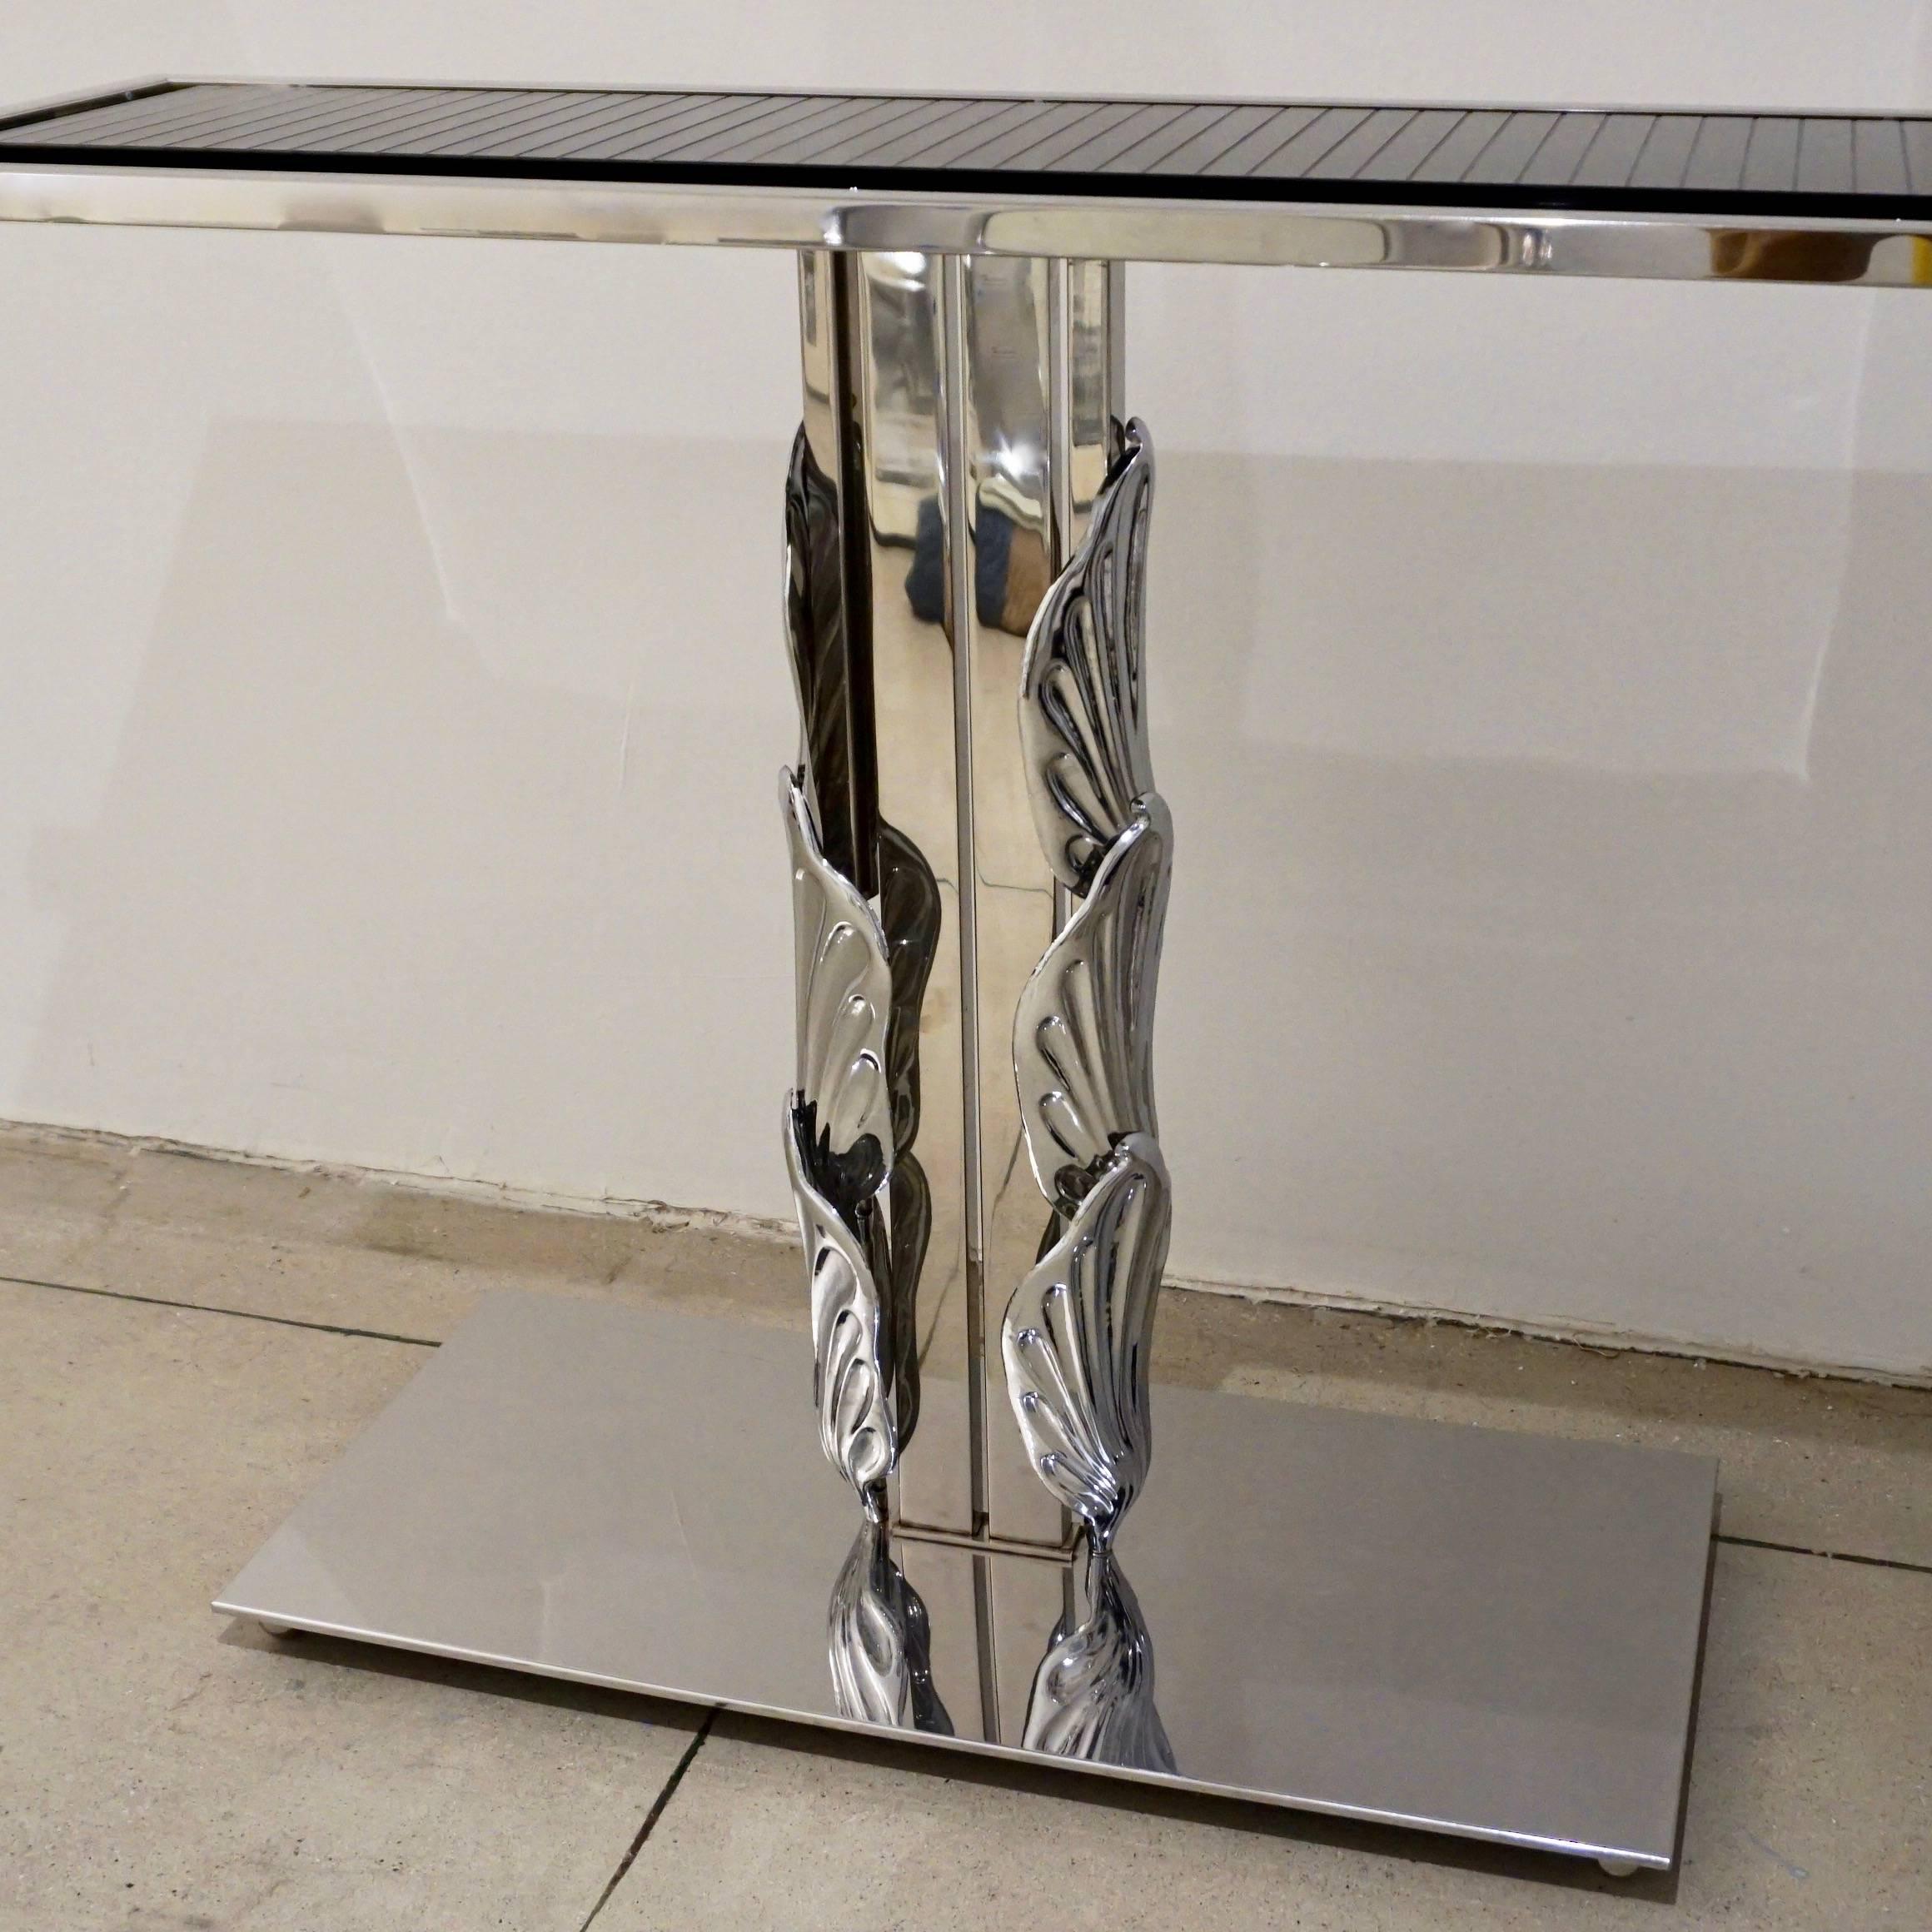 A pair is available - one-of-a-kind Modern Italian silver color nickel central console of unique and exclusive transitional design, entirely handmade, the central support adorned by hand chased polished chrome elements with shell or stylized leaf